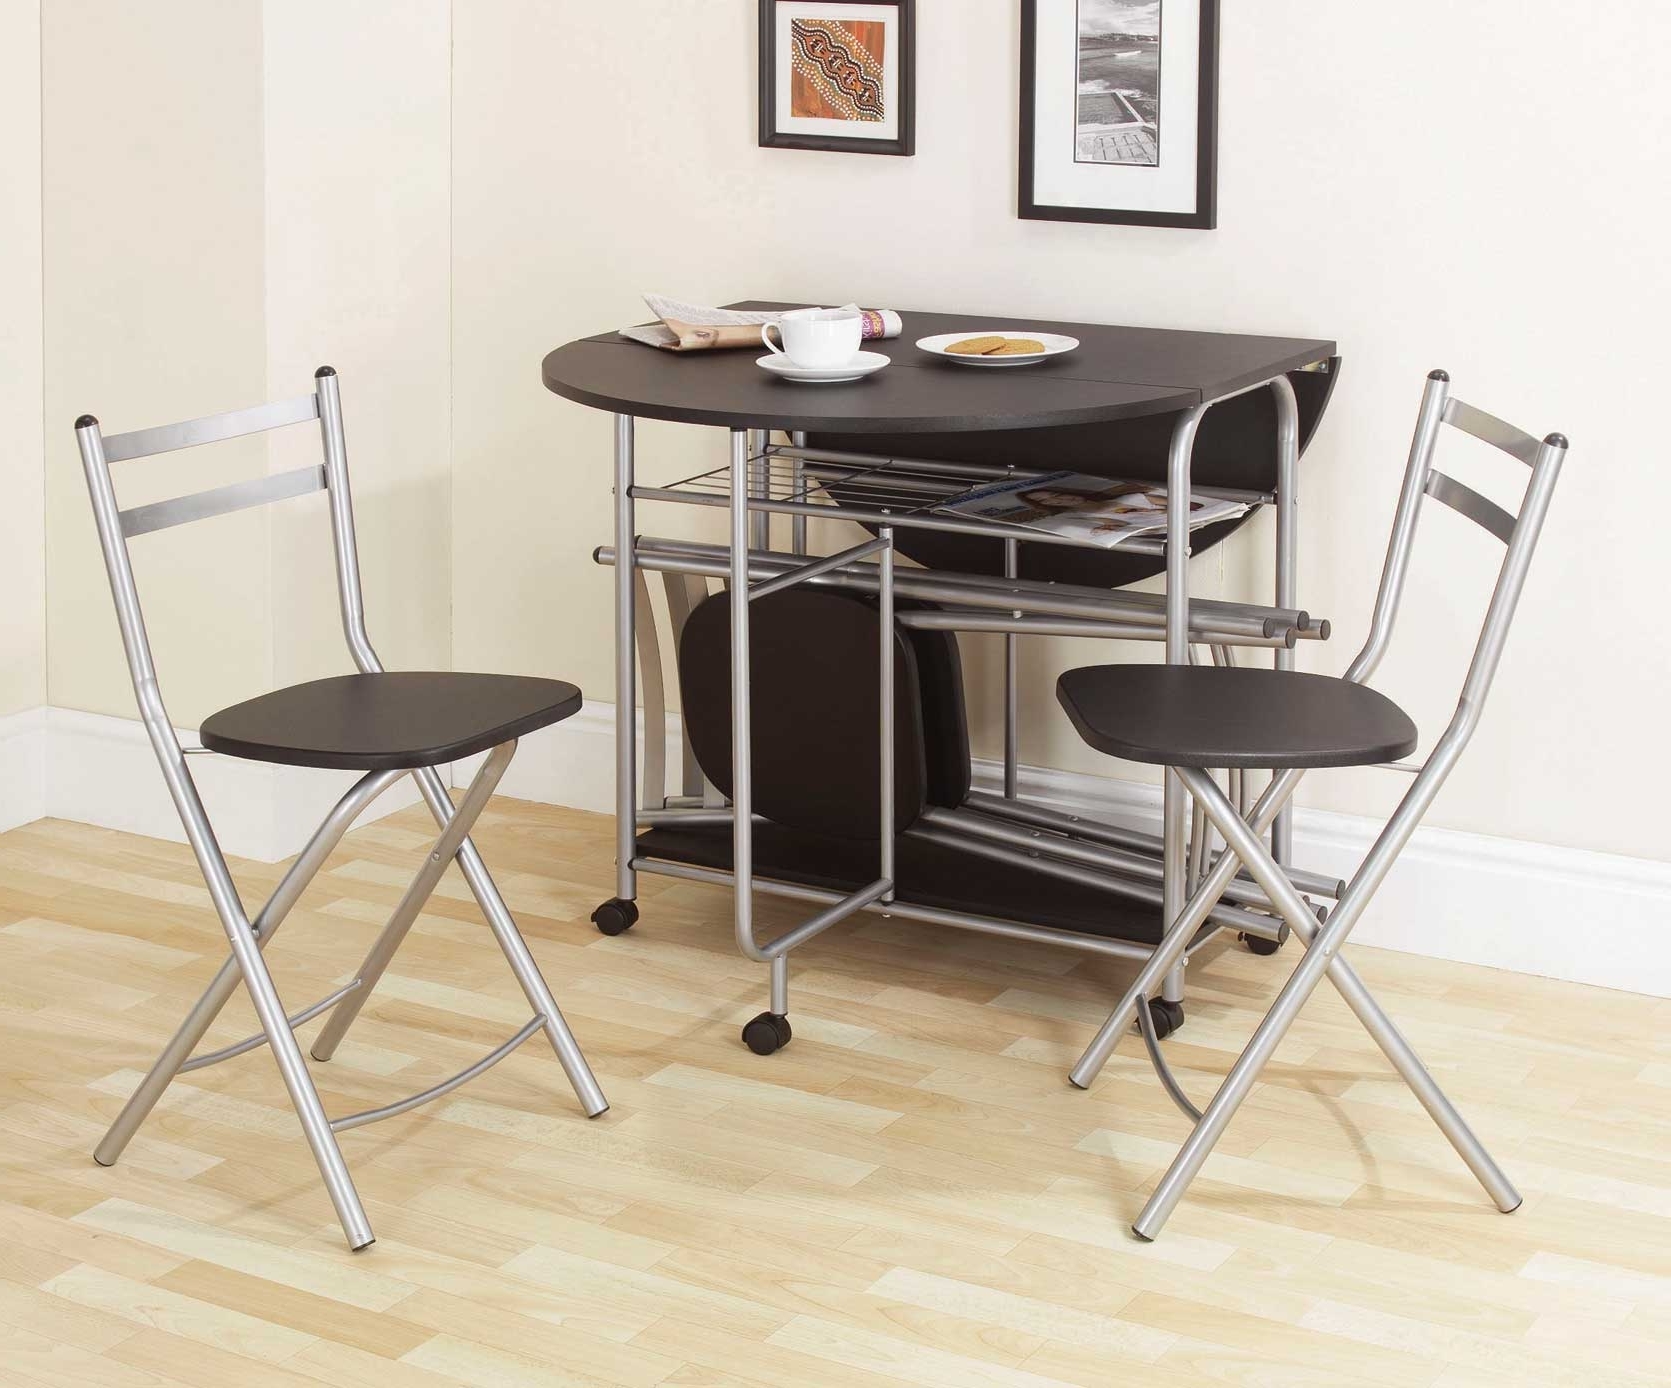  fold away table and chairs set